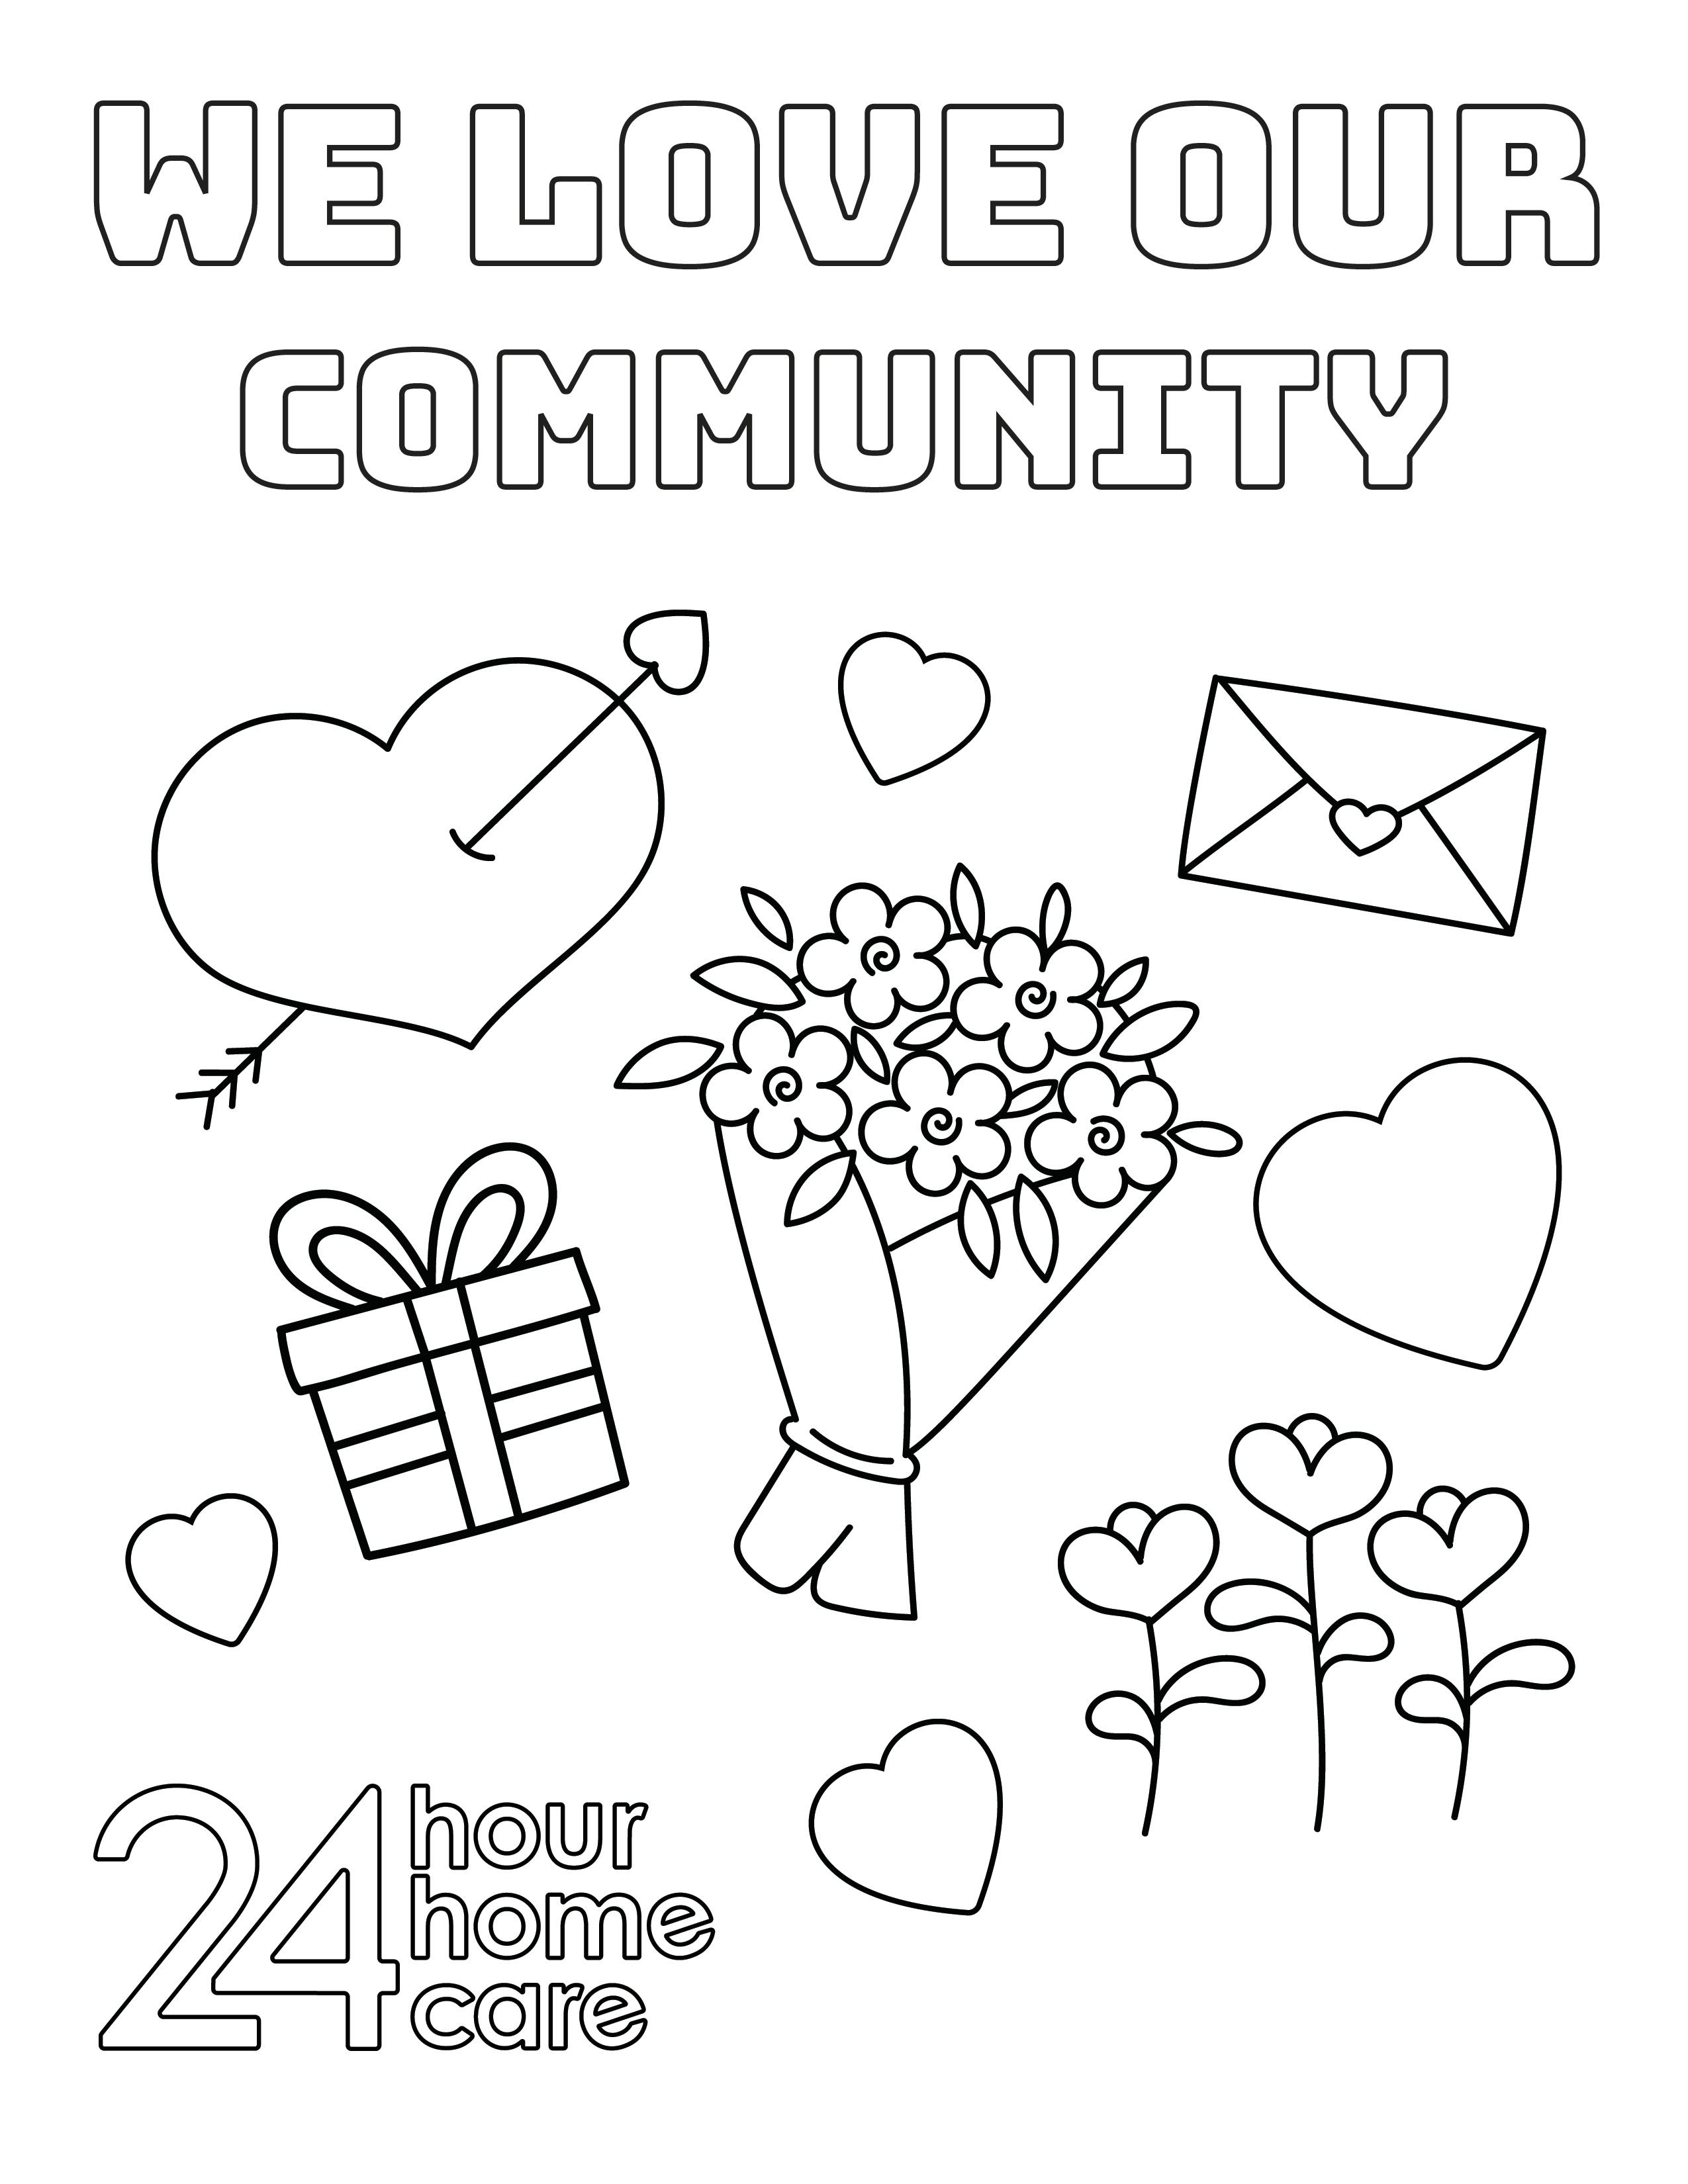 We love our community Valentine's Day coloring sheet